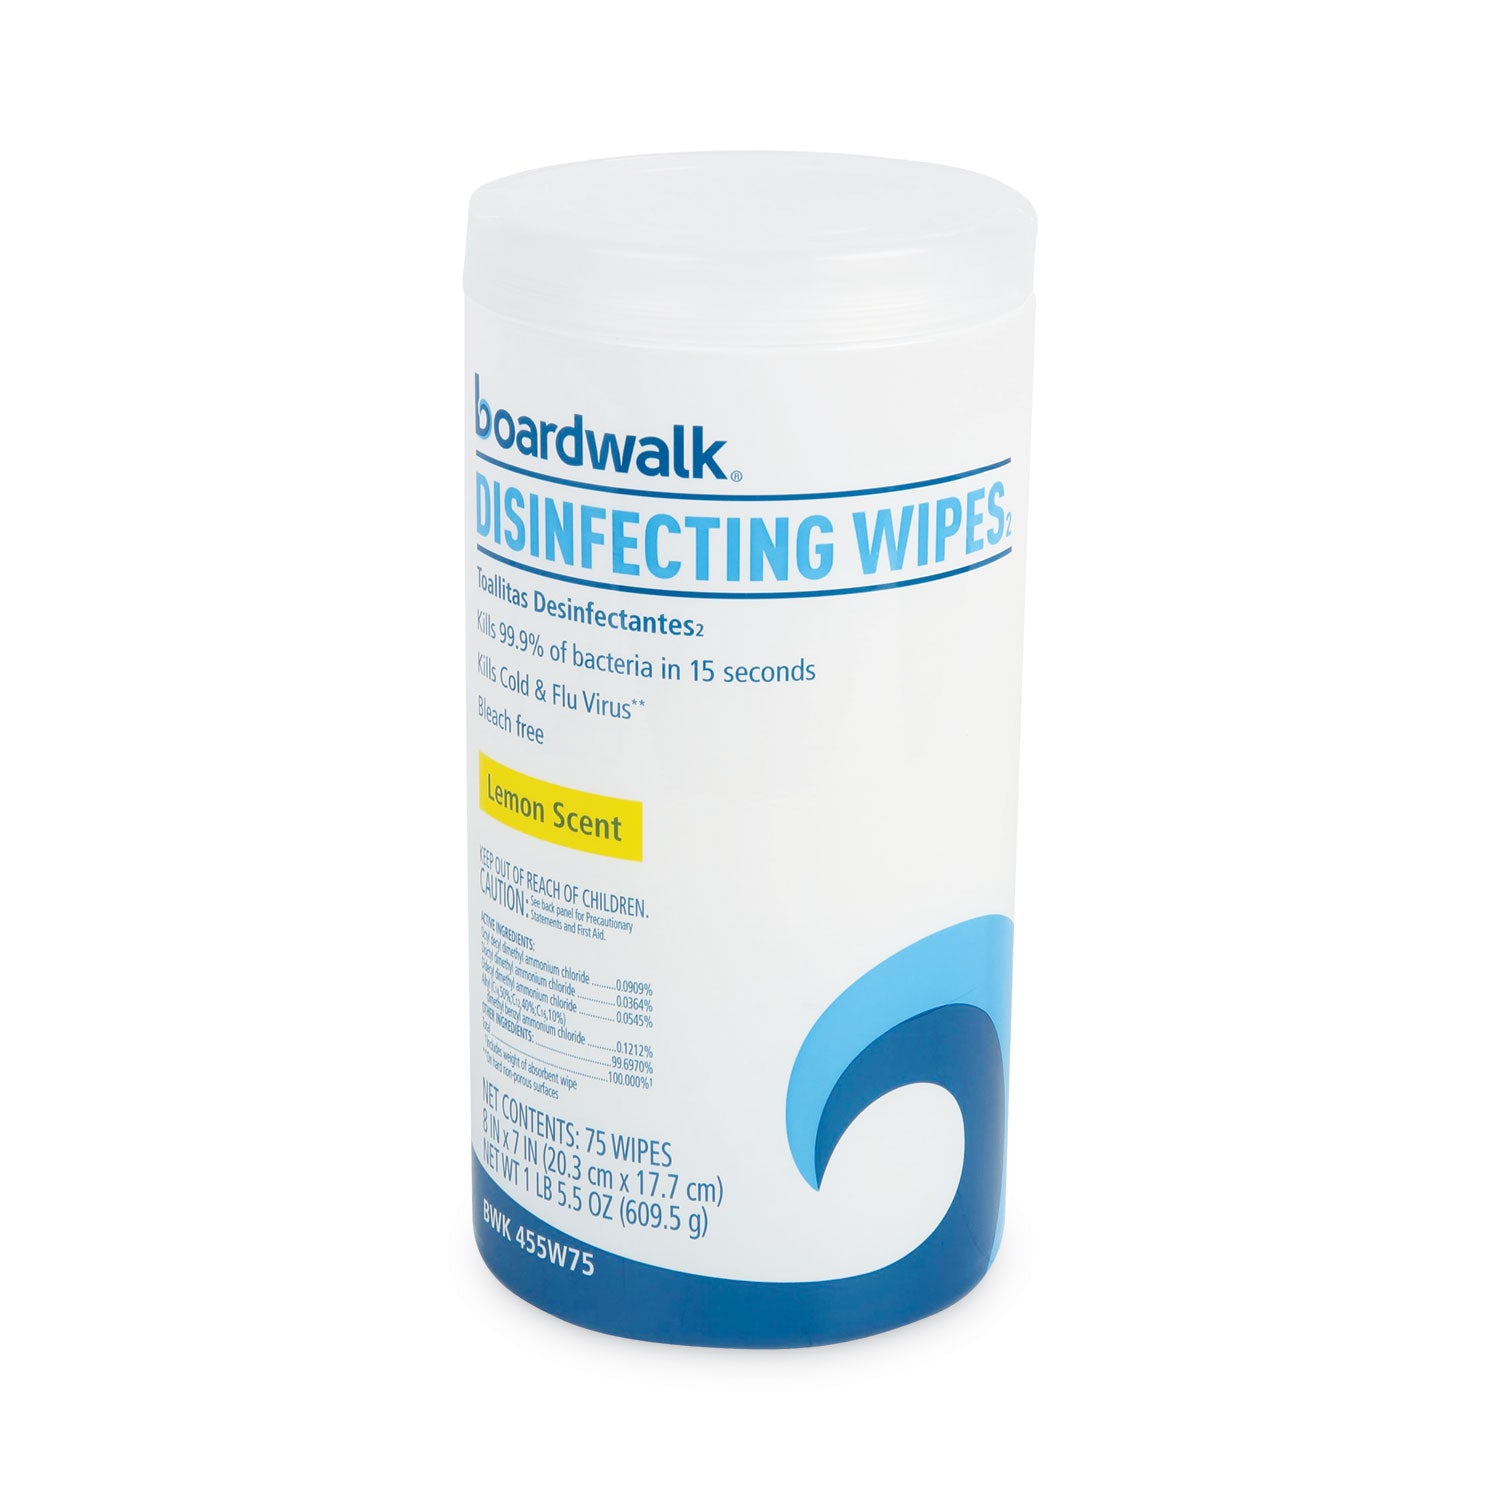 disinfecting-wipes-7-x-8-lemon-scent-75-canister-6-canisters-carton_bwk455w75 - 2